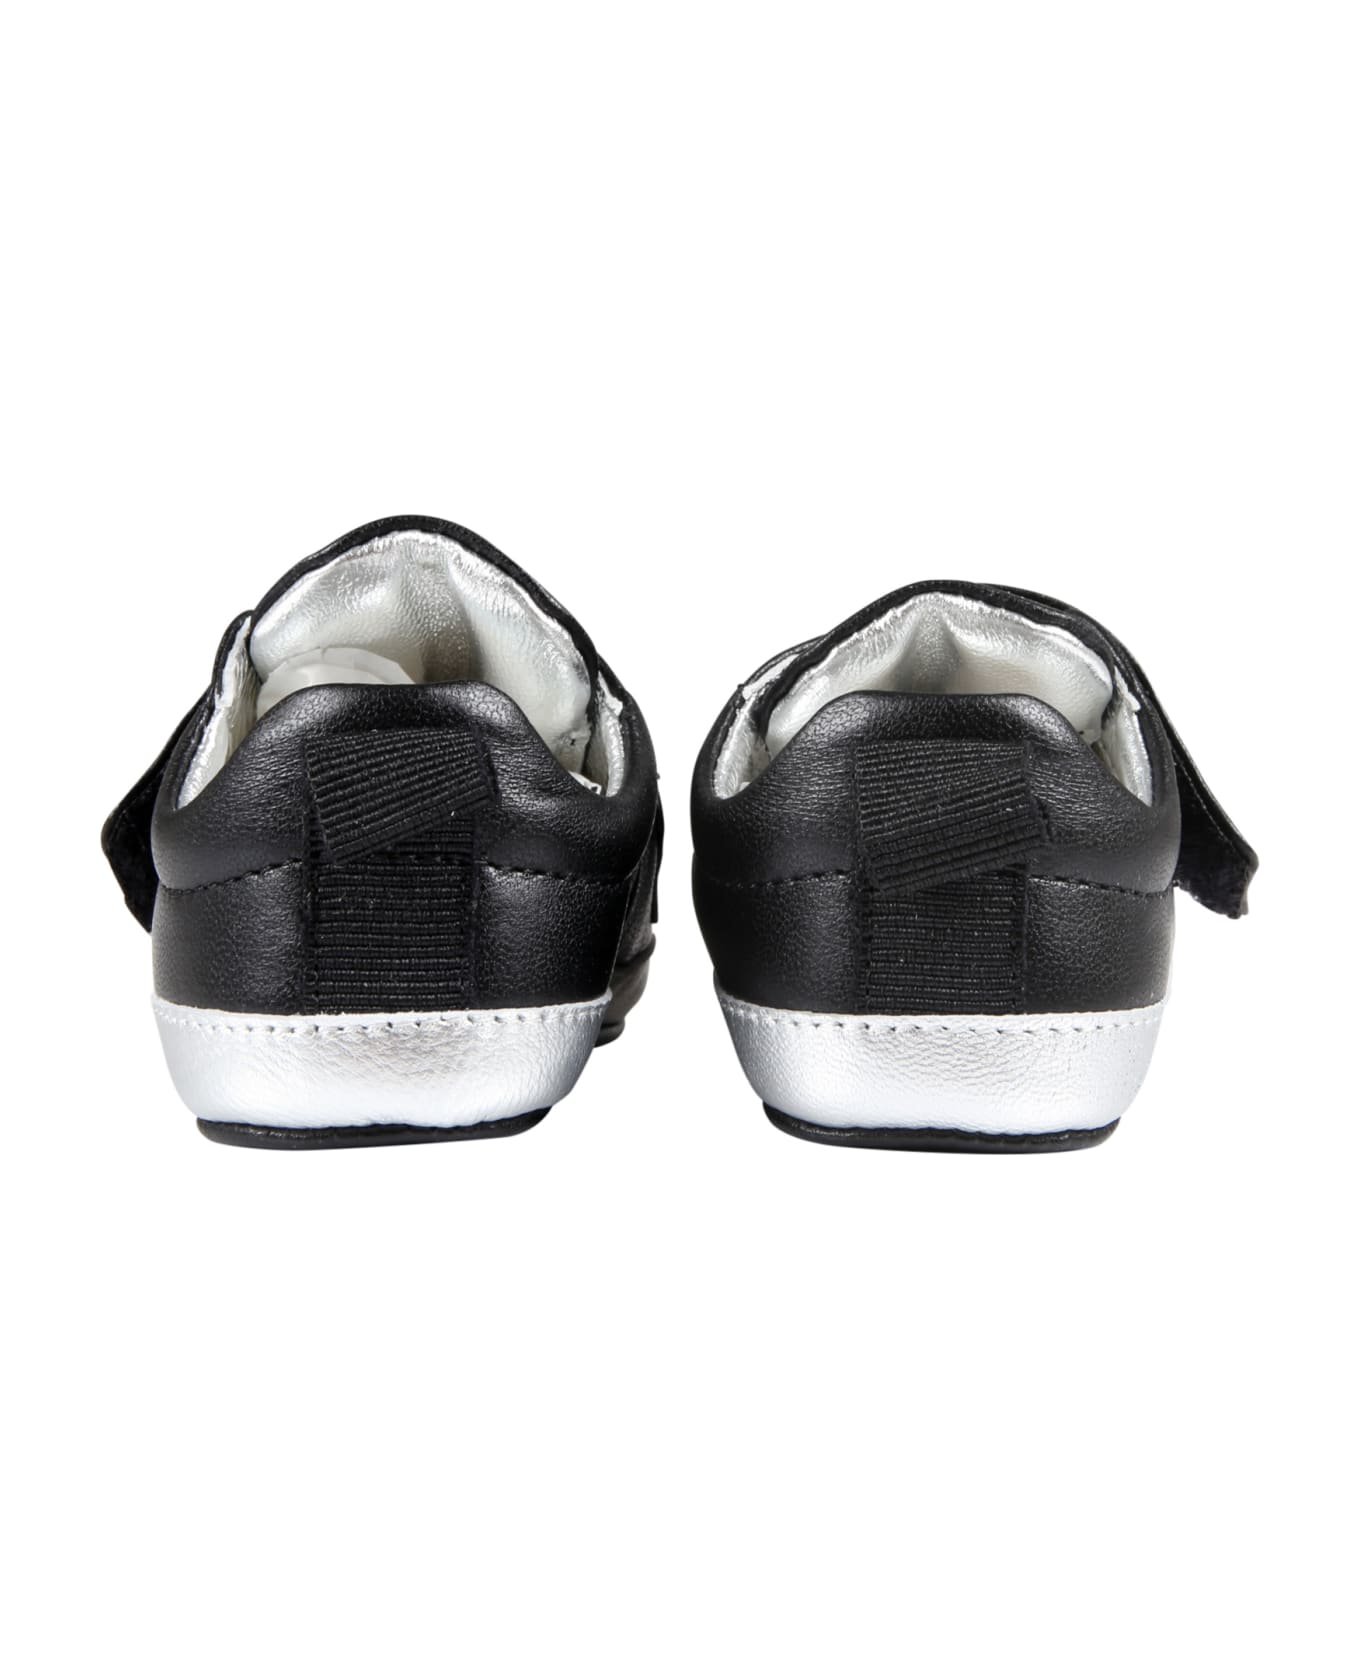 Moschino Black Sneakers For Baby Girl - Black